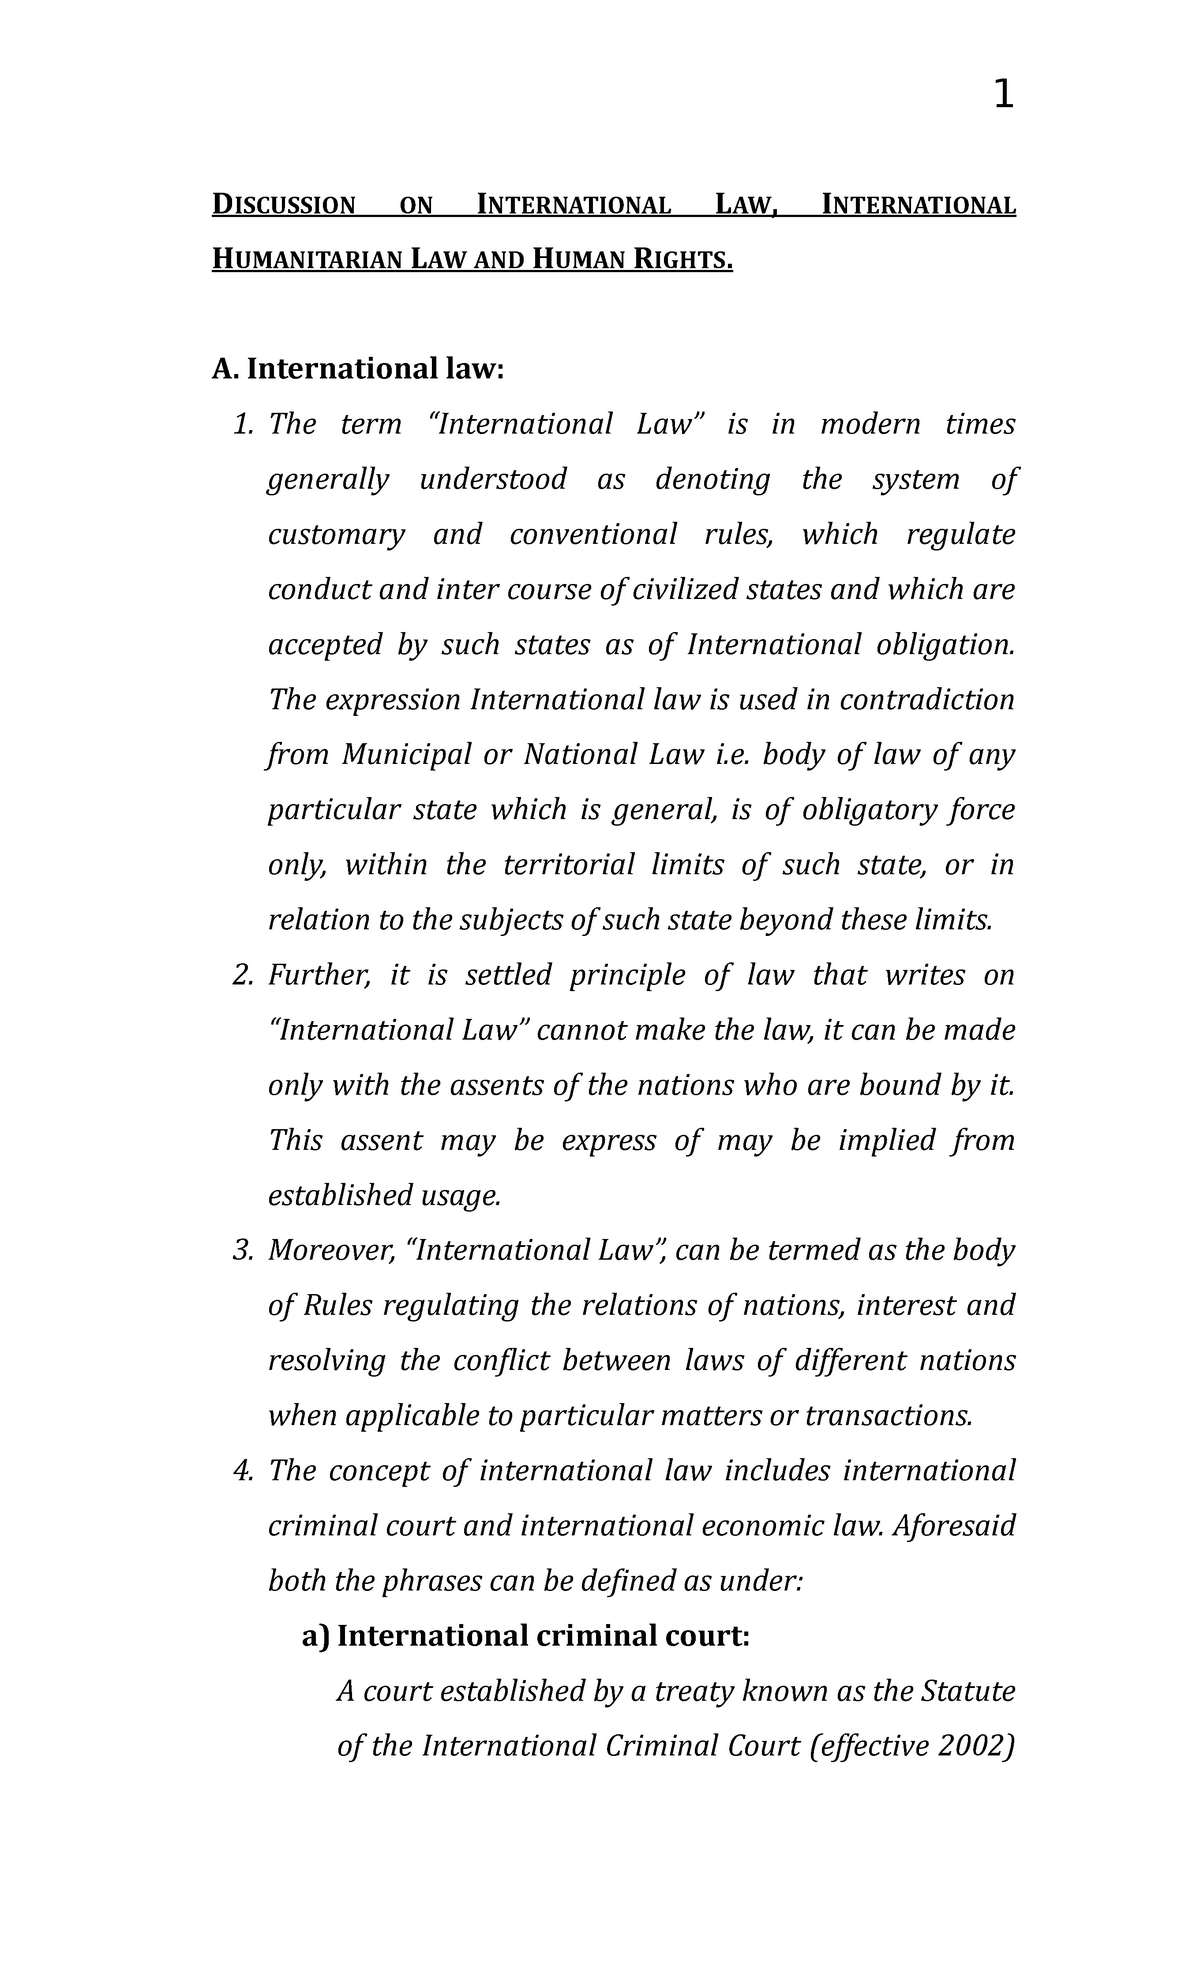 laws of international armed conflict and detention in non-international armed conflicts